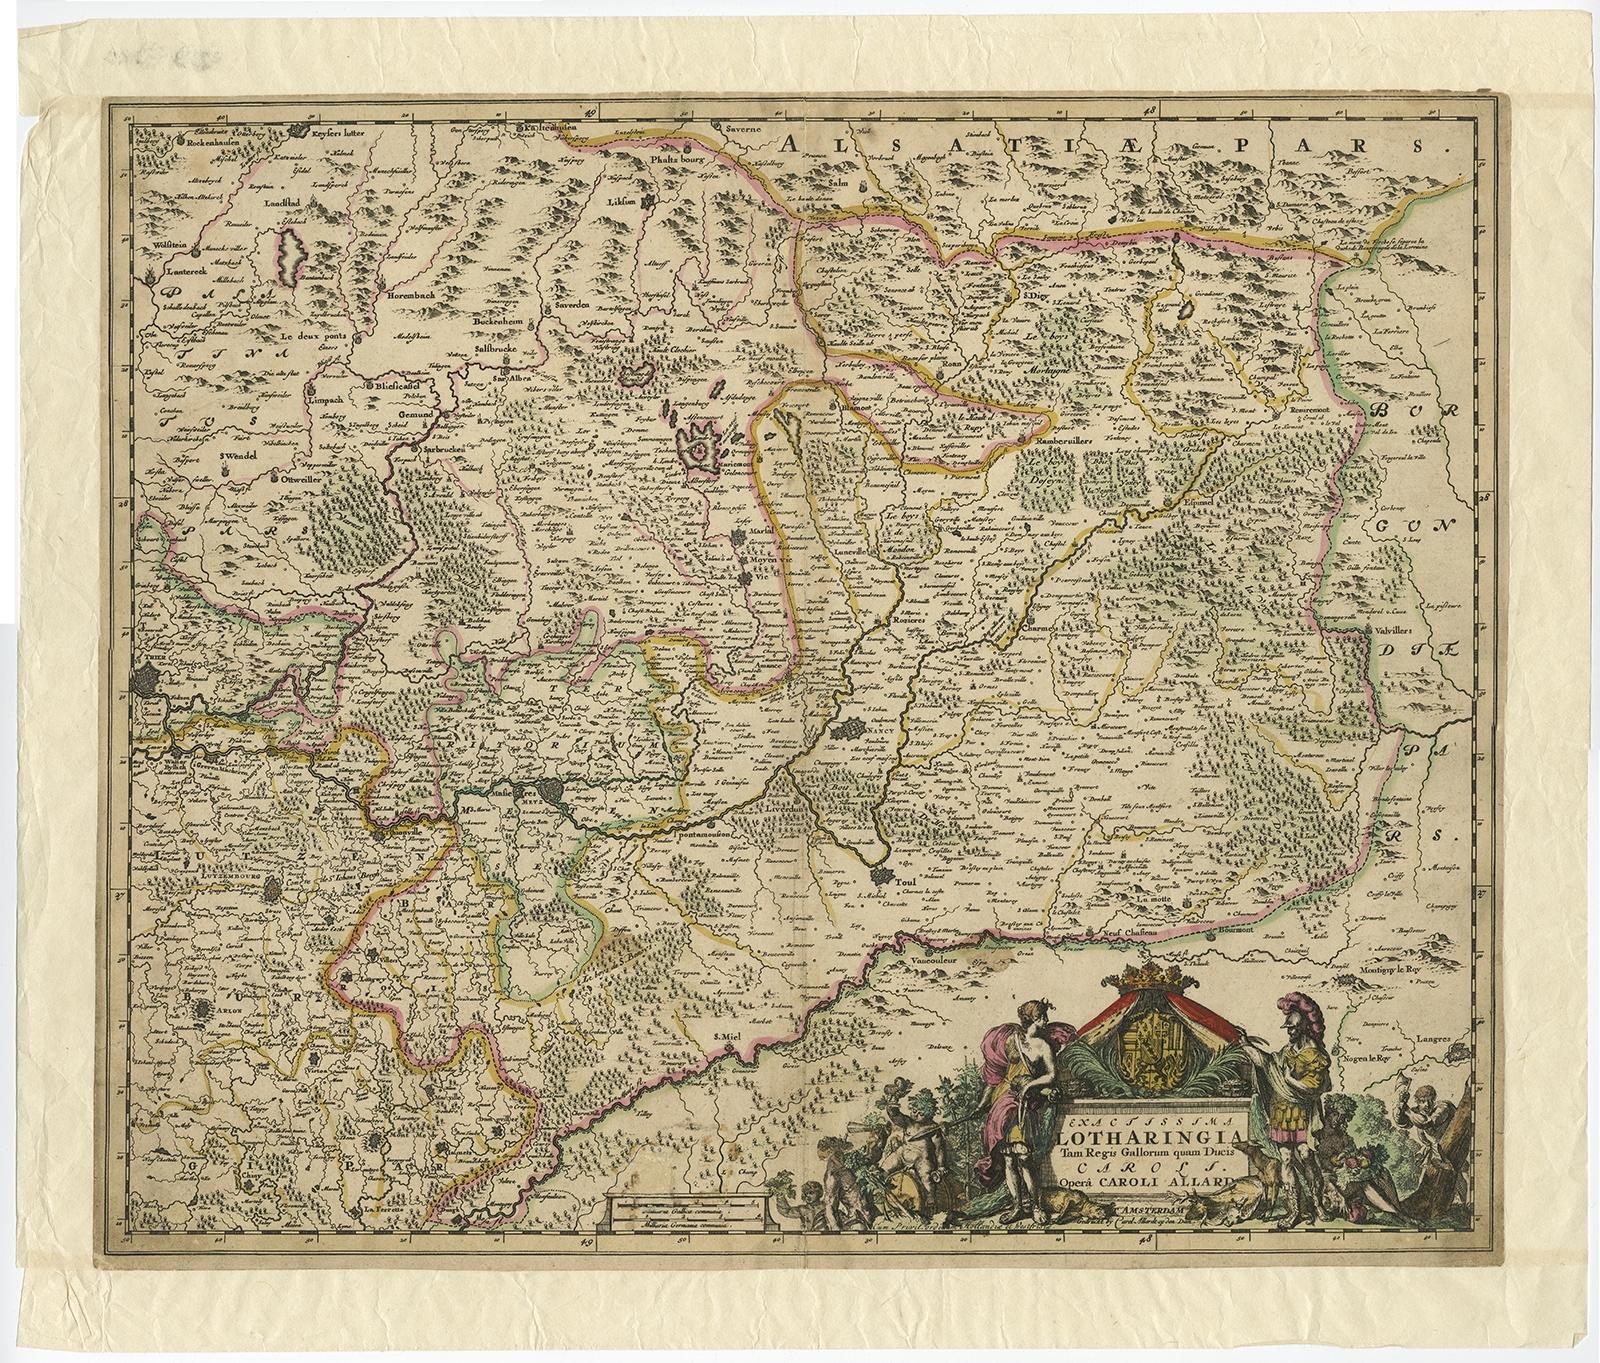 Description: Antique map titled 'Exactissima Lotharingia tam Regis Gallorum quam Ducis.' - 

Striking map of Luxembourg and Northern France. Includes the cities of Toul, Nancy, Metz and Trier. Embellished with a handsome title cartouche. Source